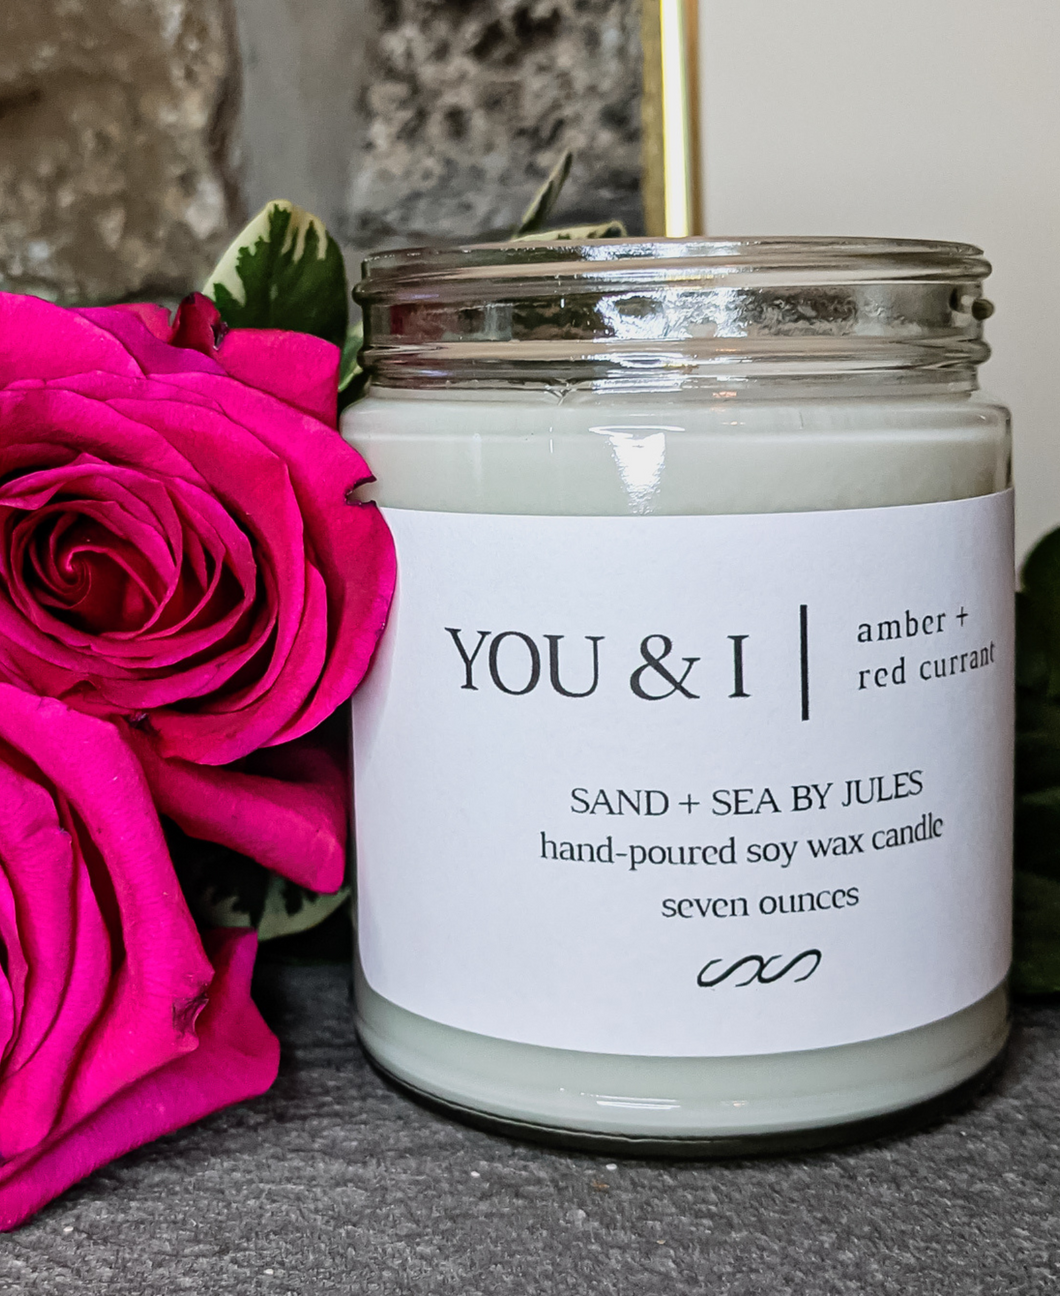 You & I: Amber & Red Currant